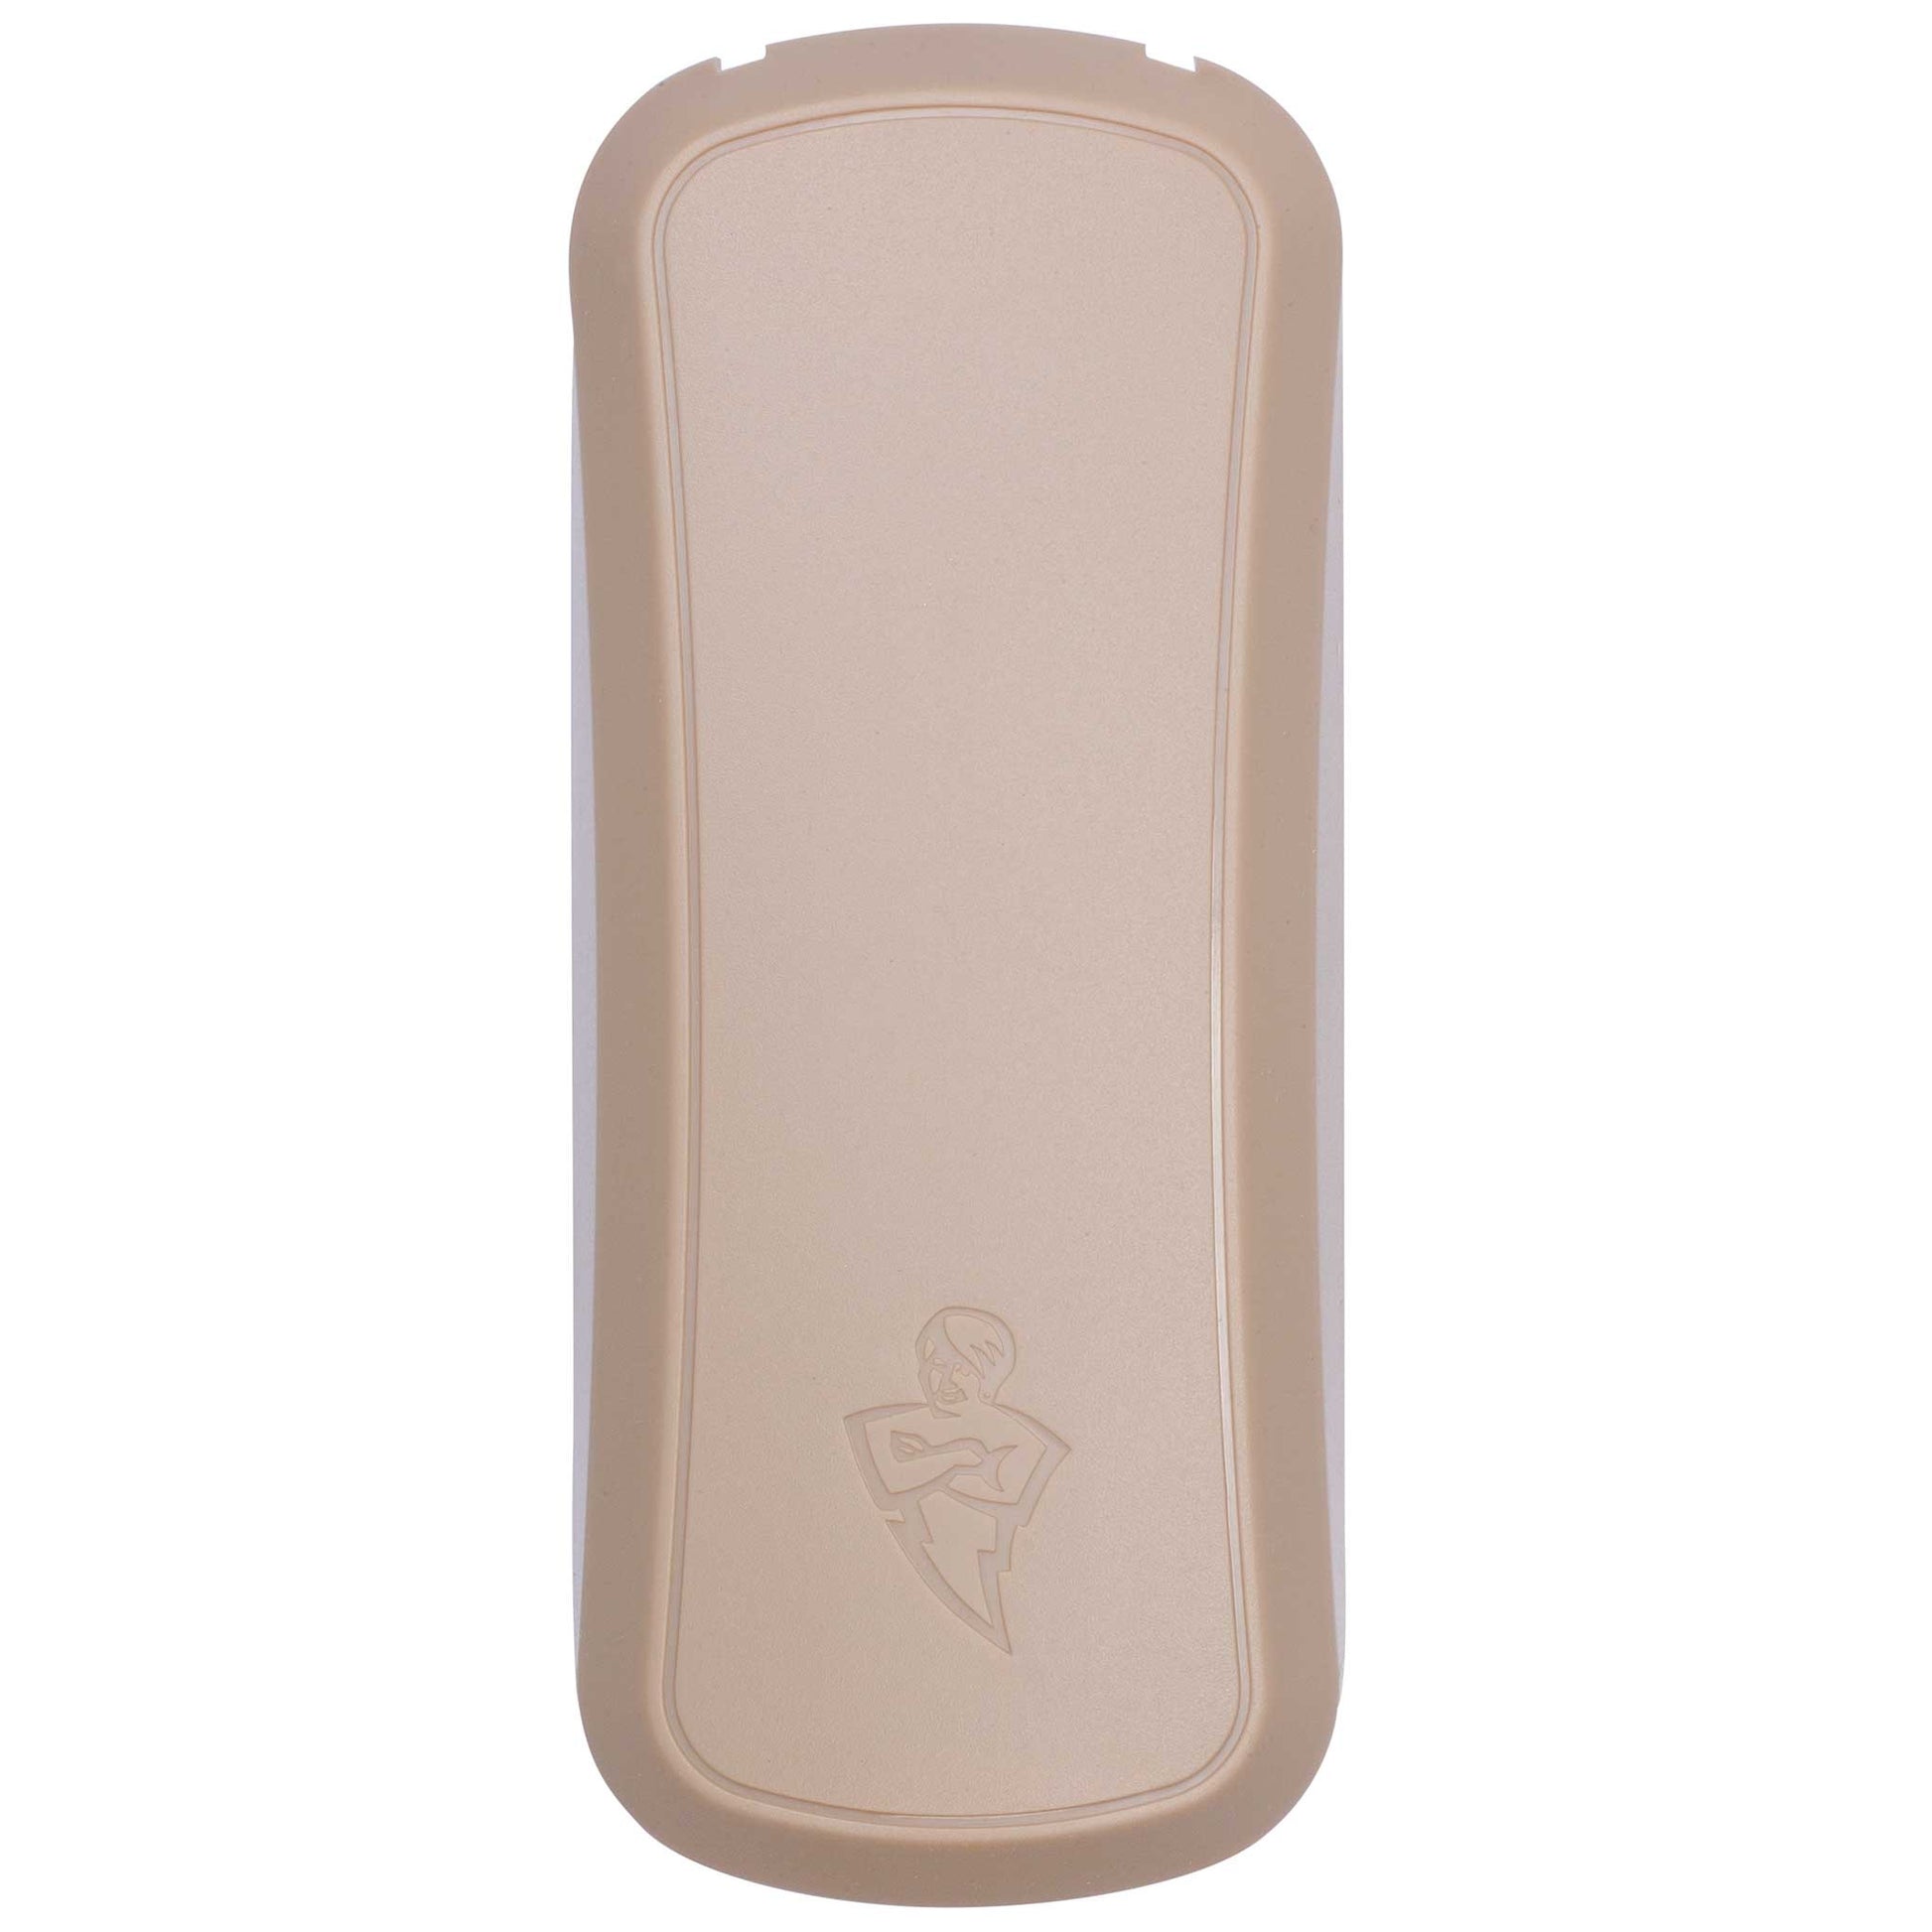 Tan Flip-Up Cover for Wireless Keyless Entry Pad (Cover Only) ,  Keypads - The Genie Company